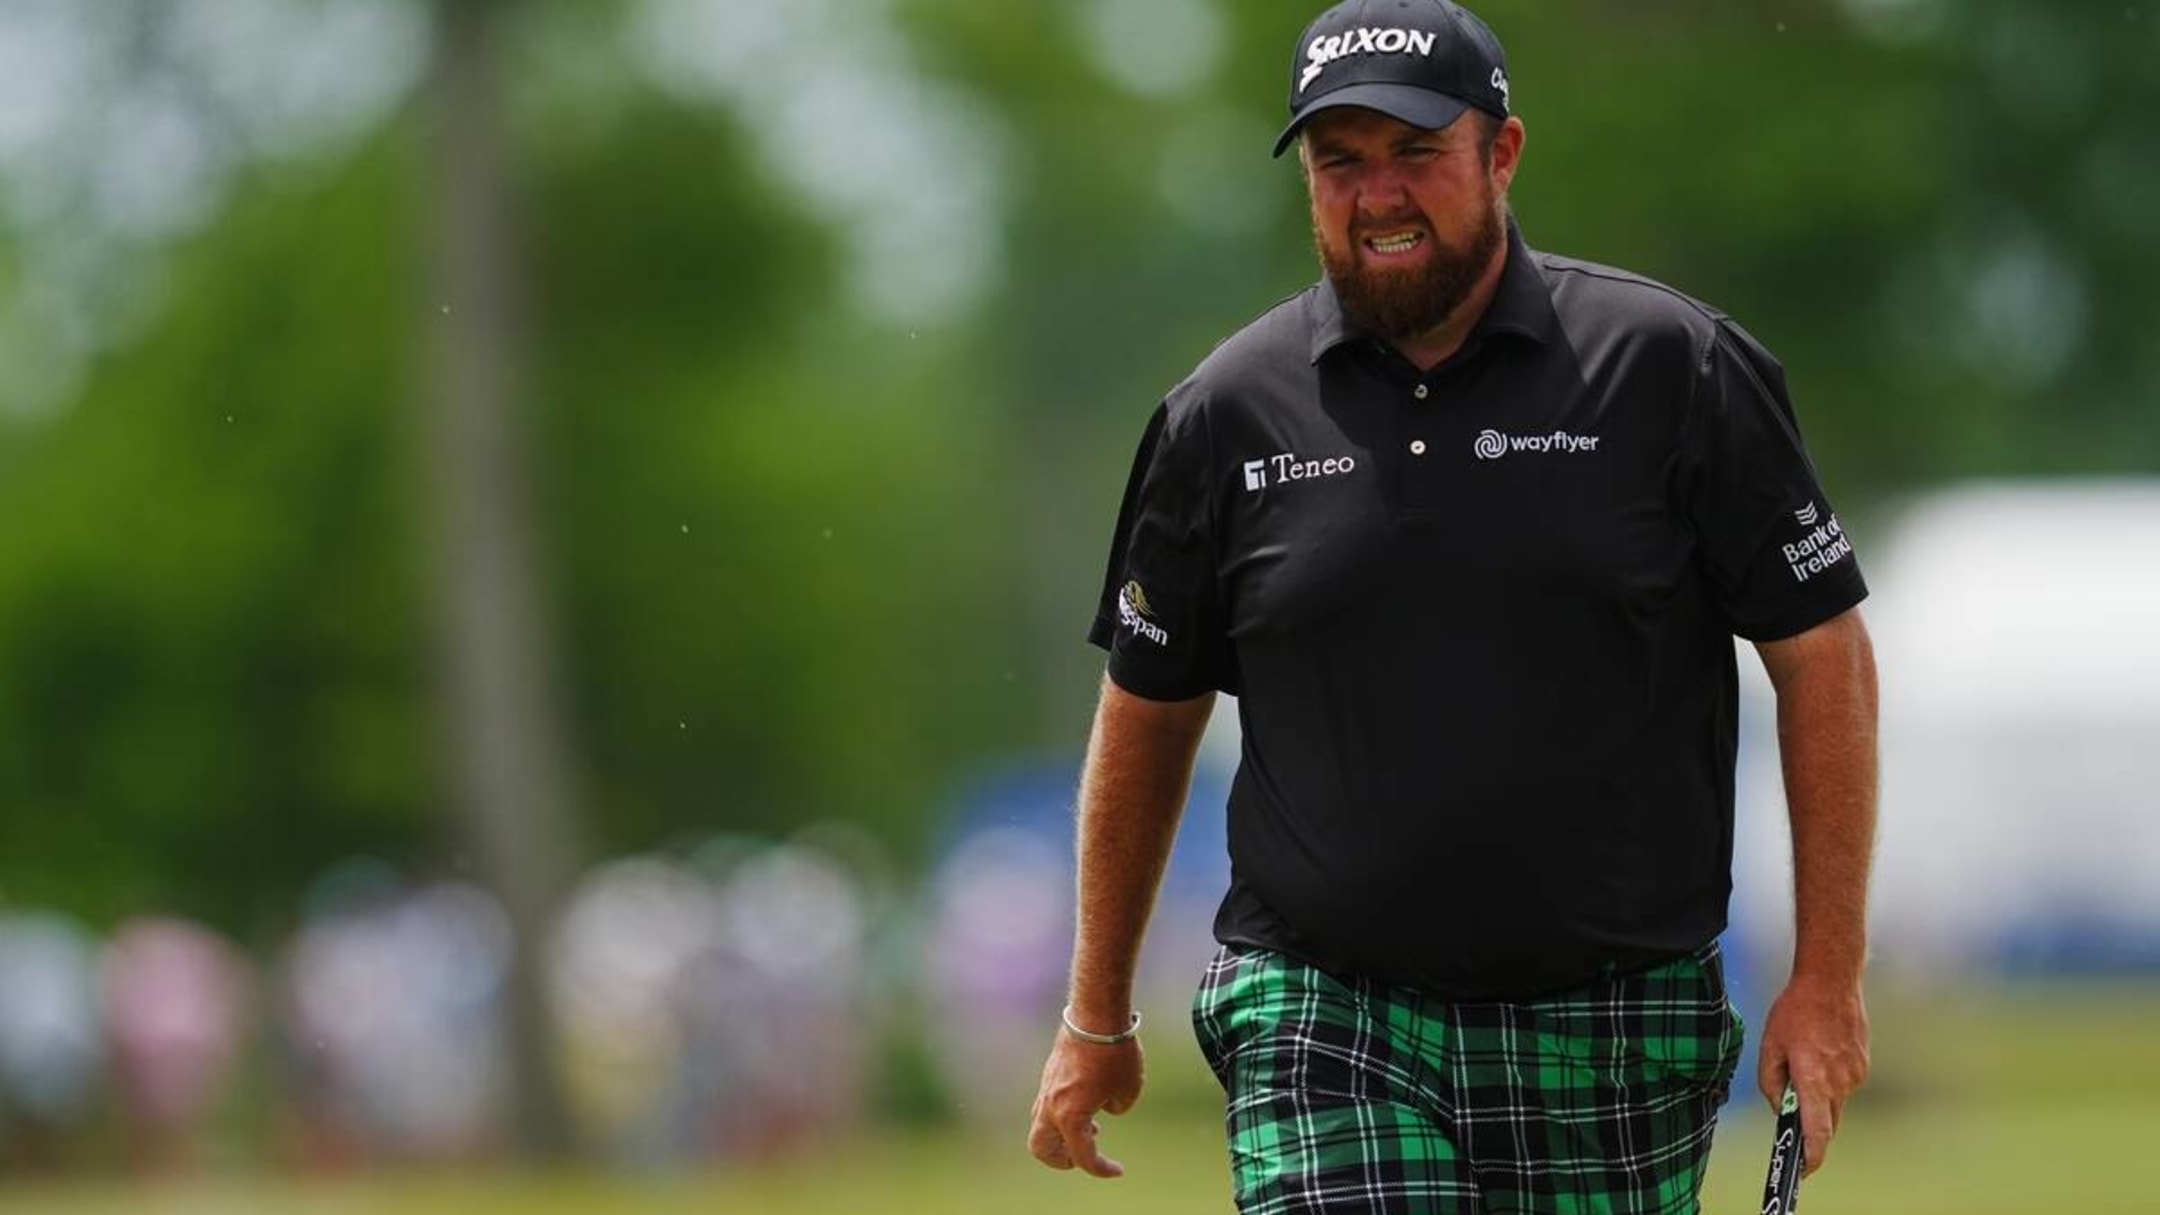 How to watch Shane Lowry at the PGA Championship online Streaming TV, game time and odds